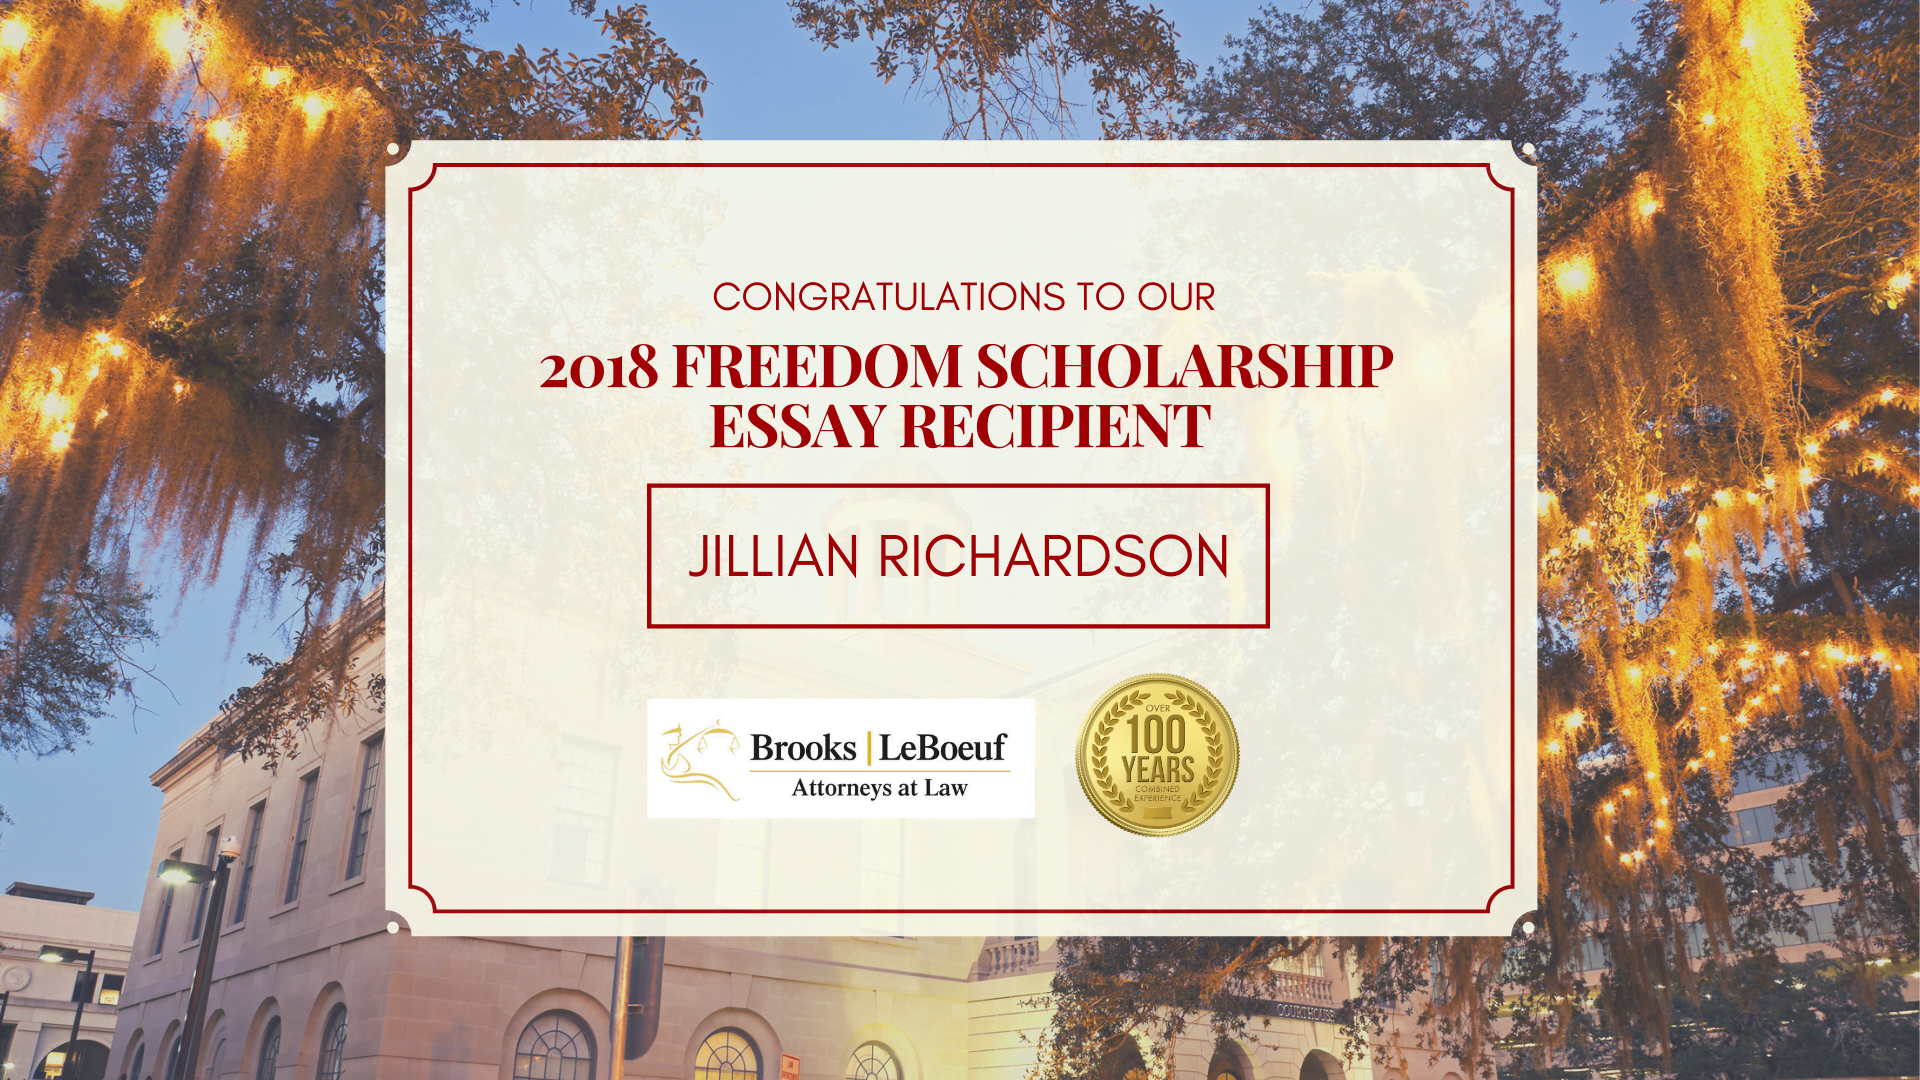 The Winning Essay for the 2018 Freedom Scholarship